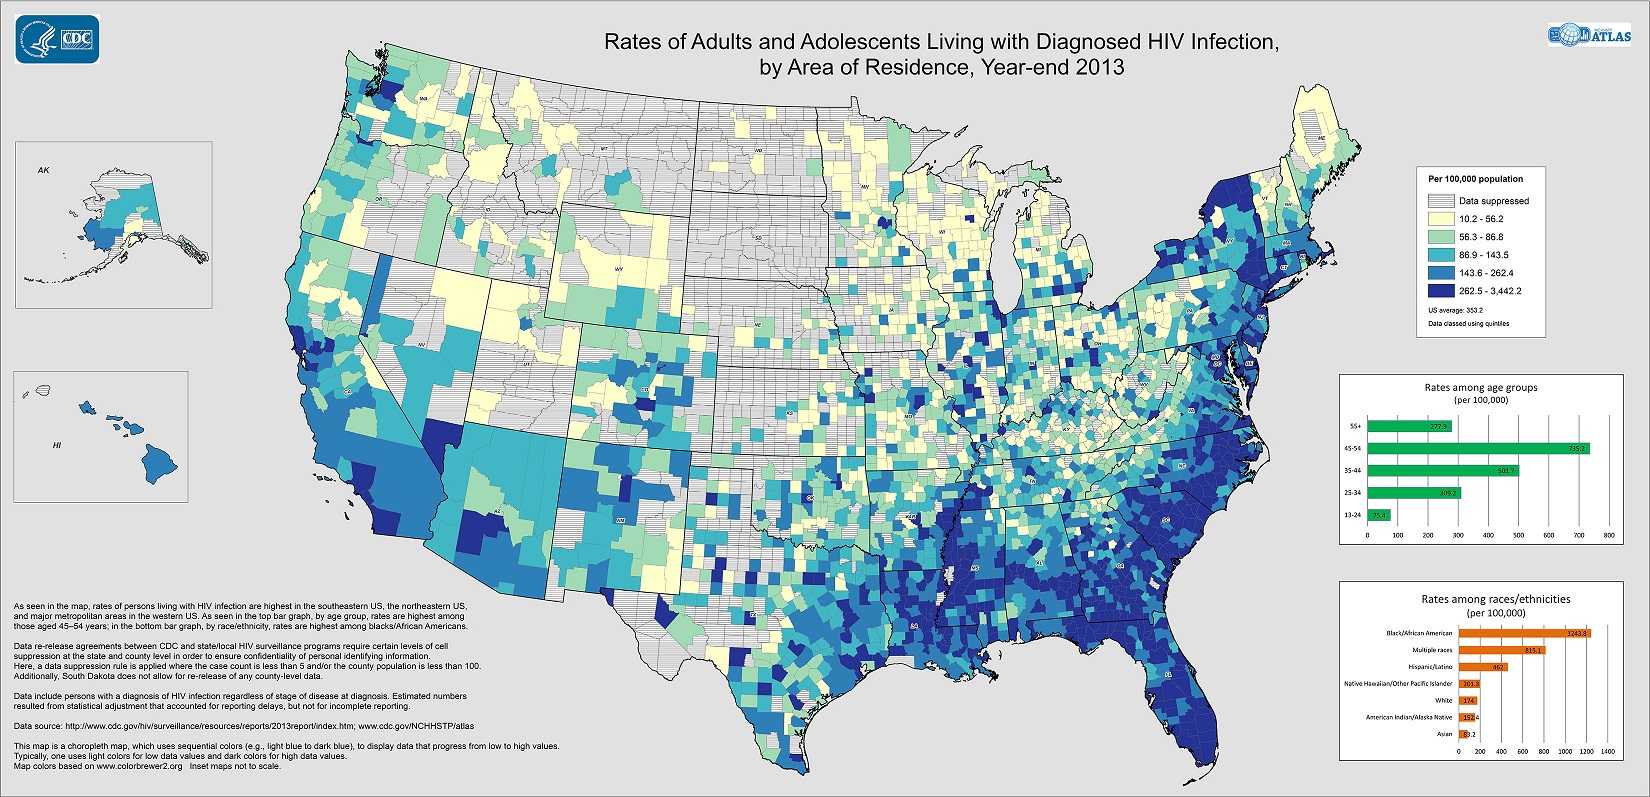 As seen in the map, rates of persons living with HIV infection are highest in the southeastern US, the northeastern US, and major metropolitan areas in the western US. As seen in the top bar graph, by age group, rates are highest among those aged 45–54 years; in the bottom bar graph, by race/ethnicity, rates are highest among blacks/African Americans.